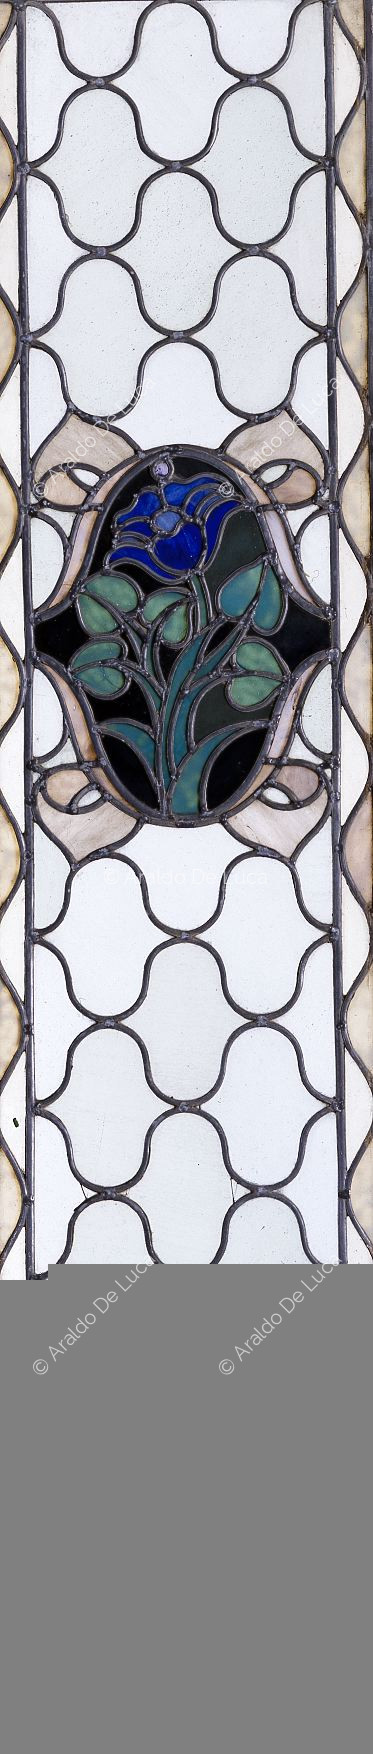 Stained glass window with geometric motif and flower